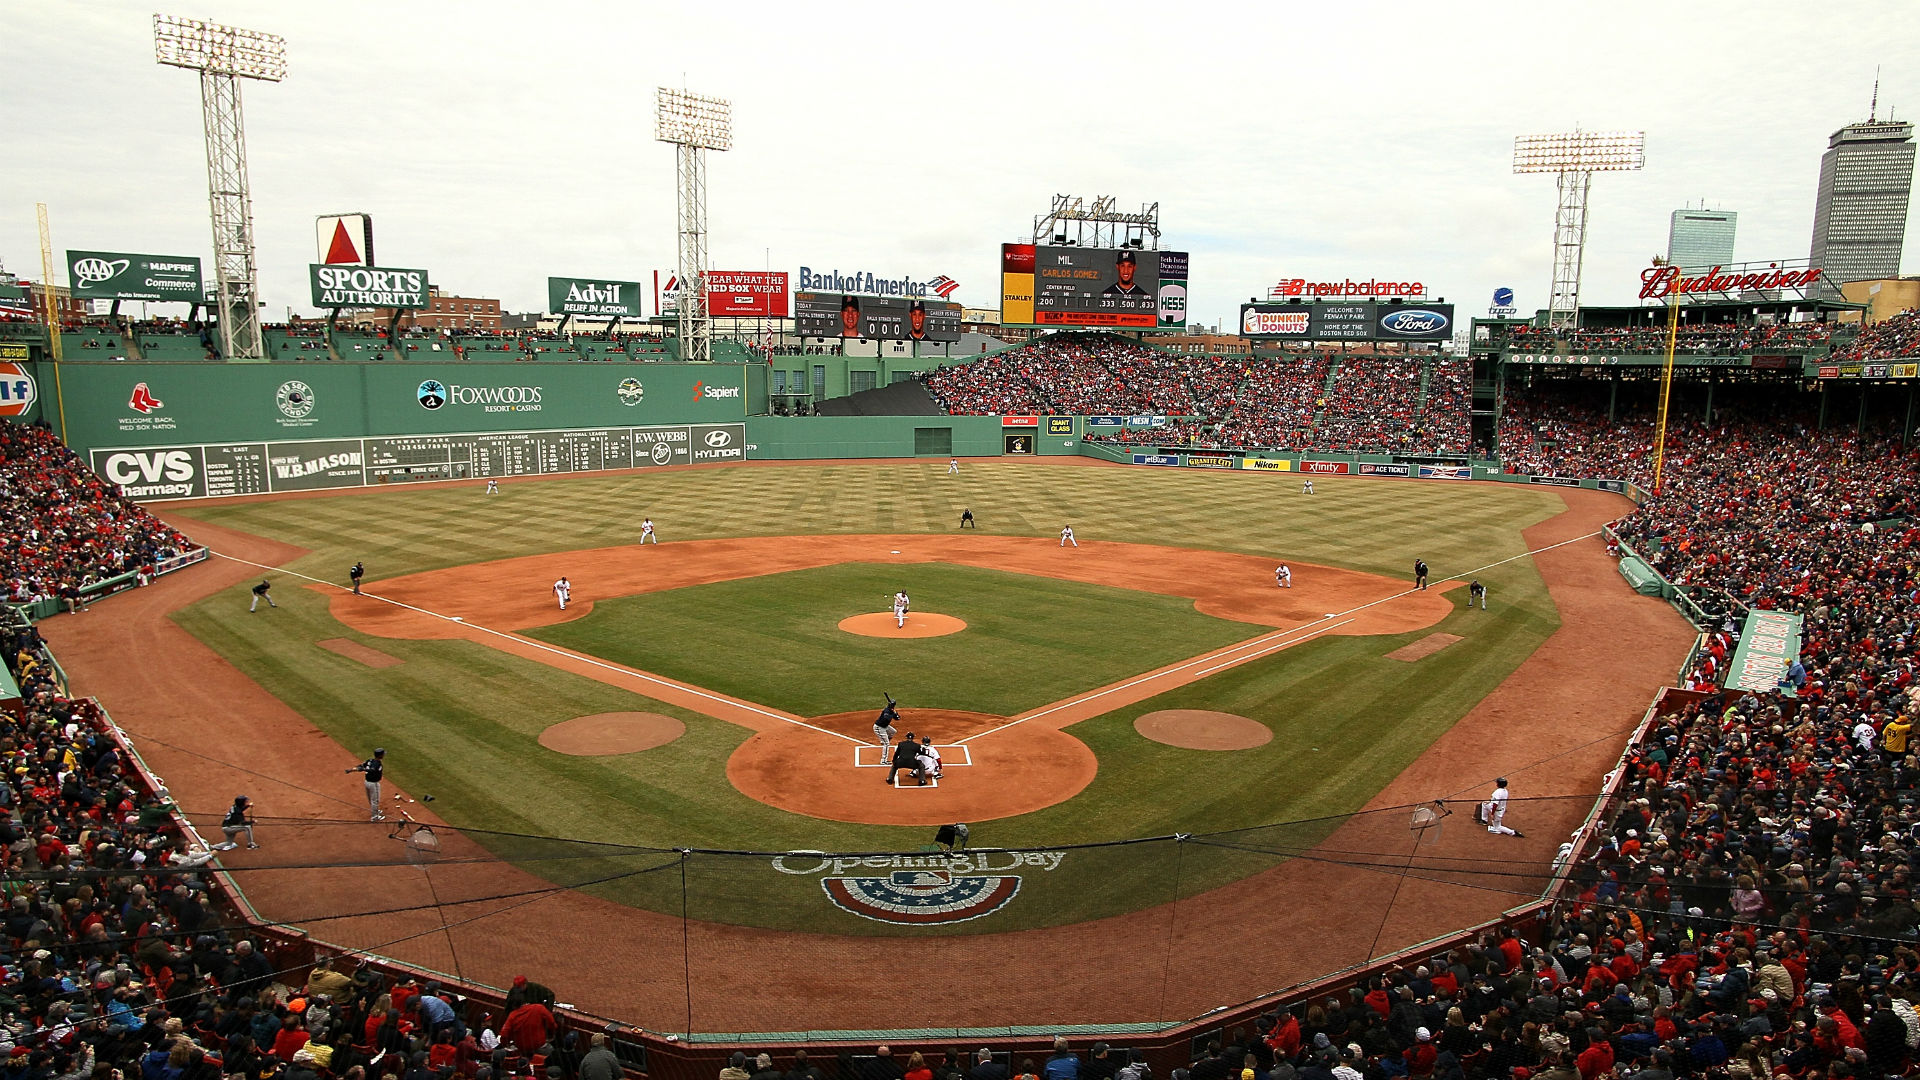 ACC, AAC to have bowl game played at Fenway Park | Sporting News1920 x 1080